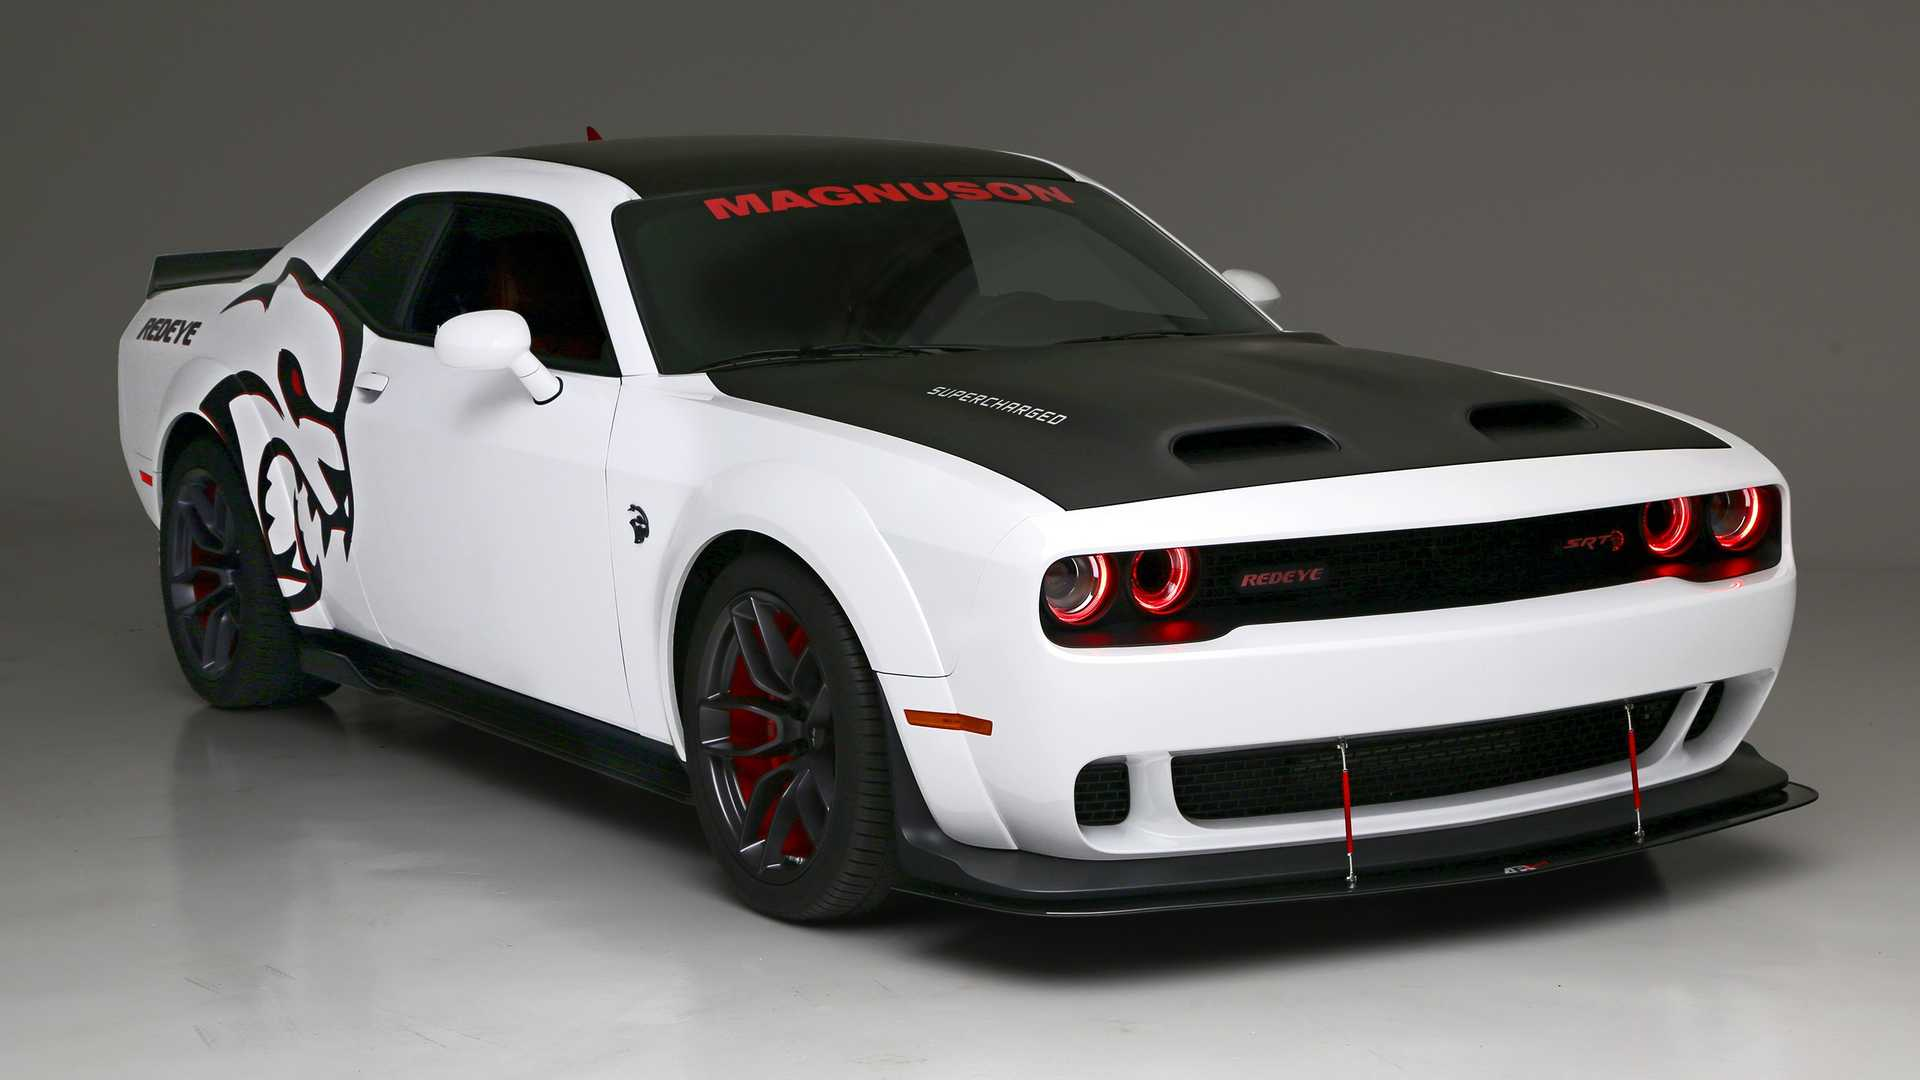 Customized Demon Cars Wallpapers Wallpaper Cave